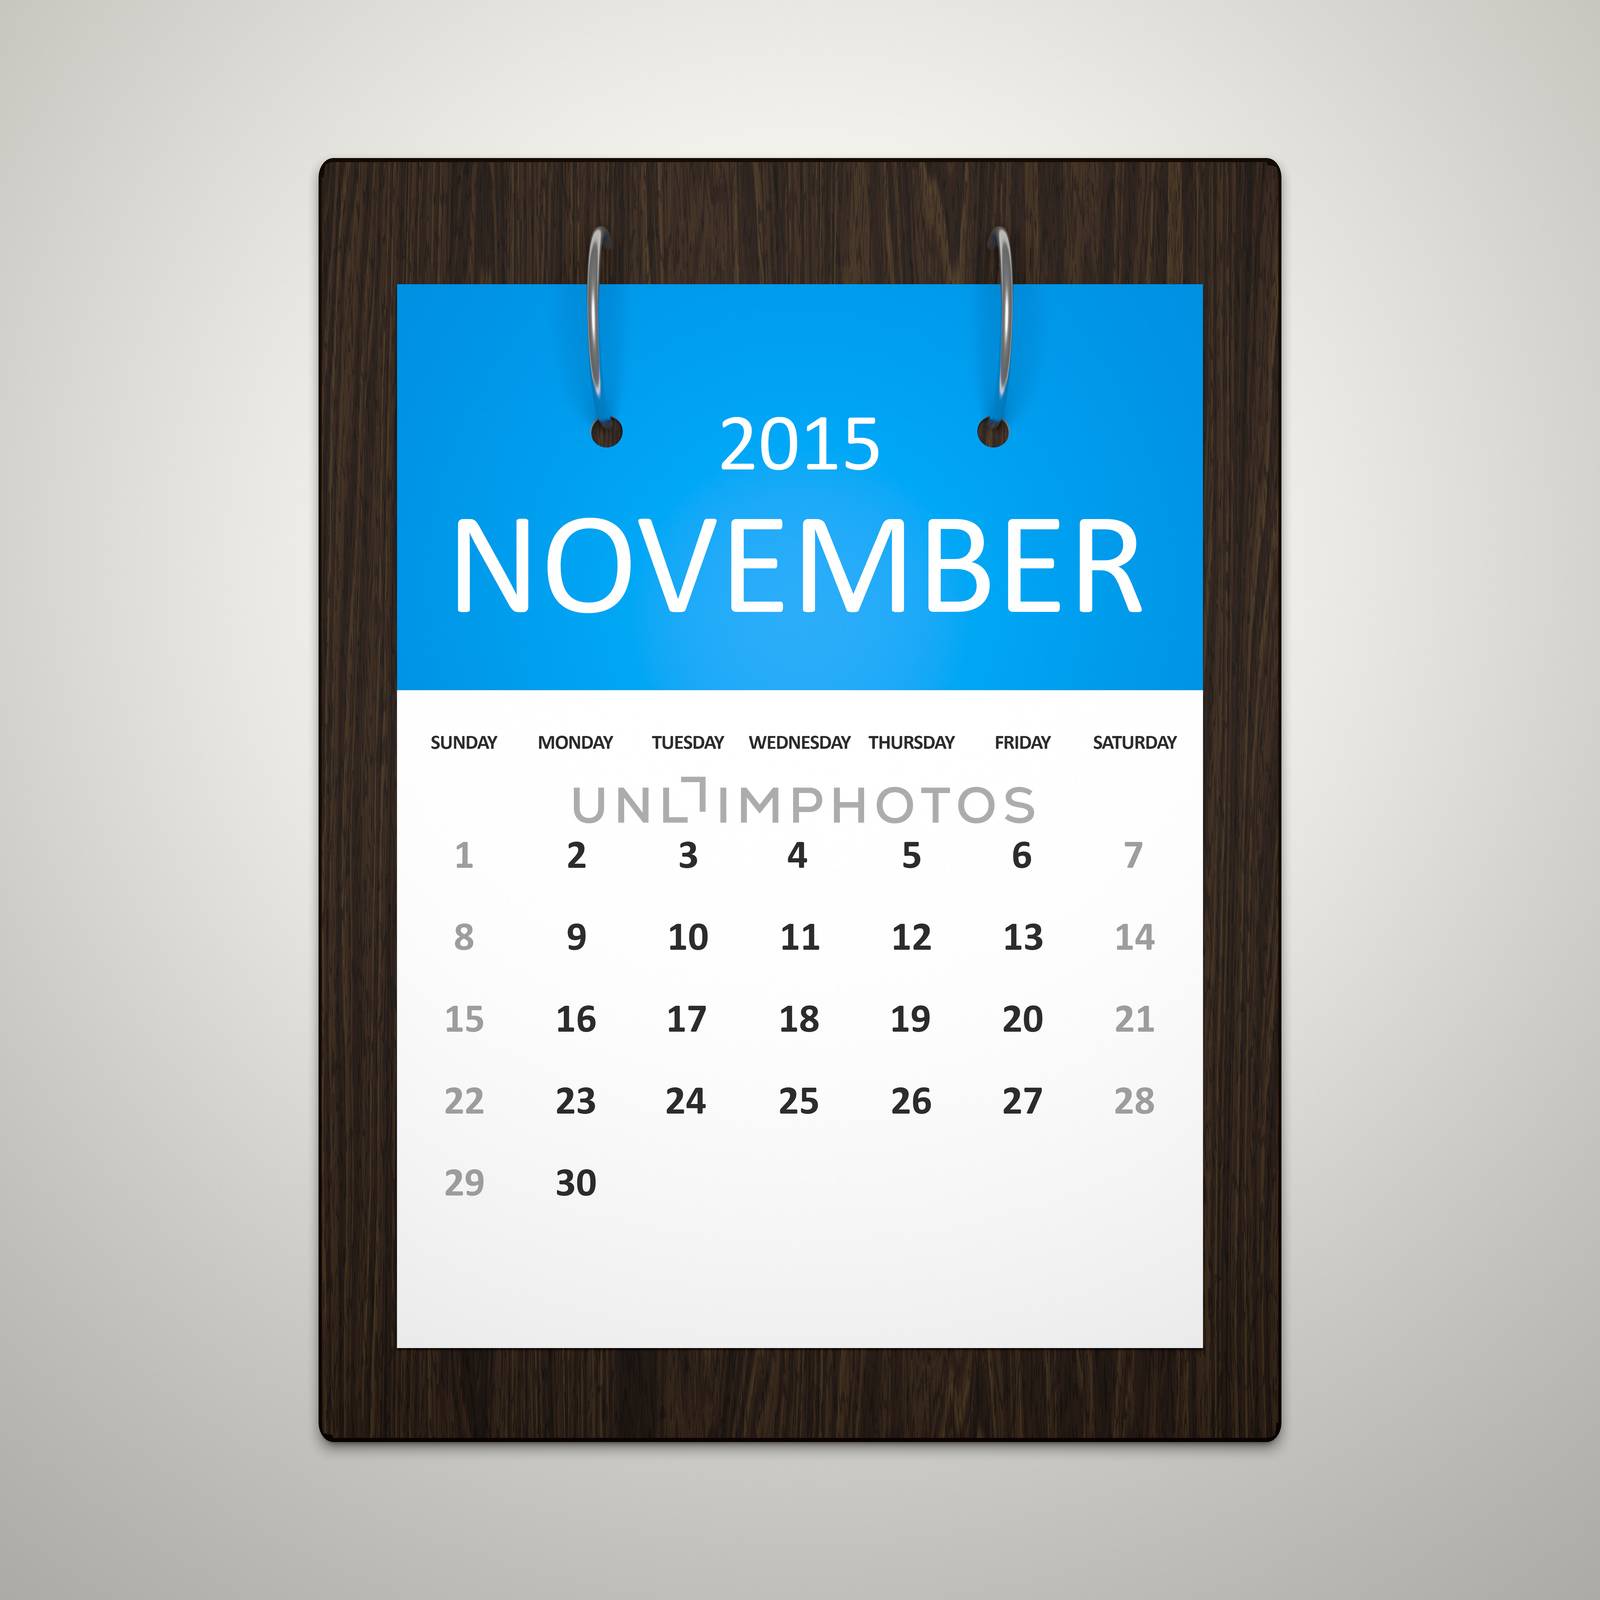 An image of a stylish calendar for event planning November 2015